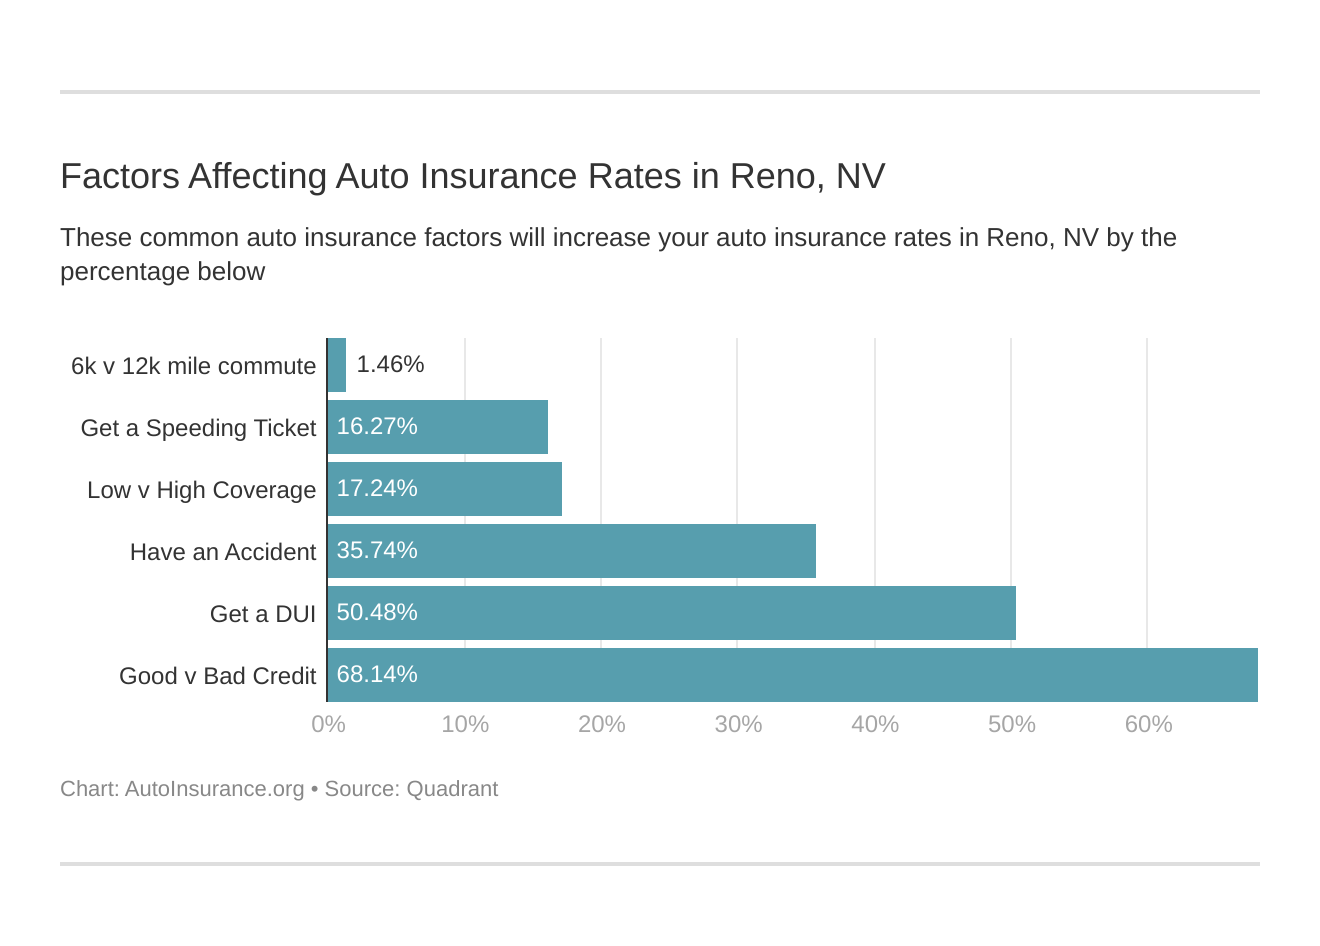 Factors Affecting Auto Insurance Rates in Reno, NV